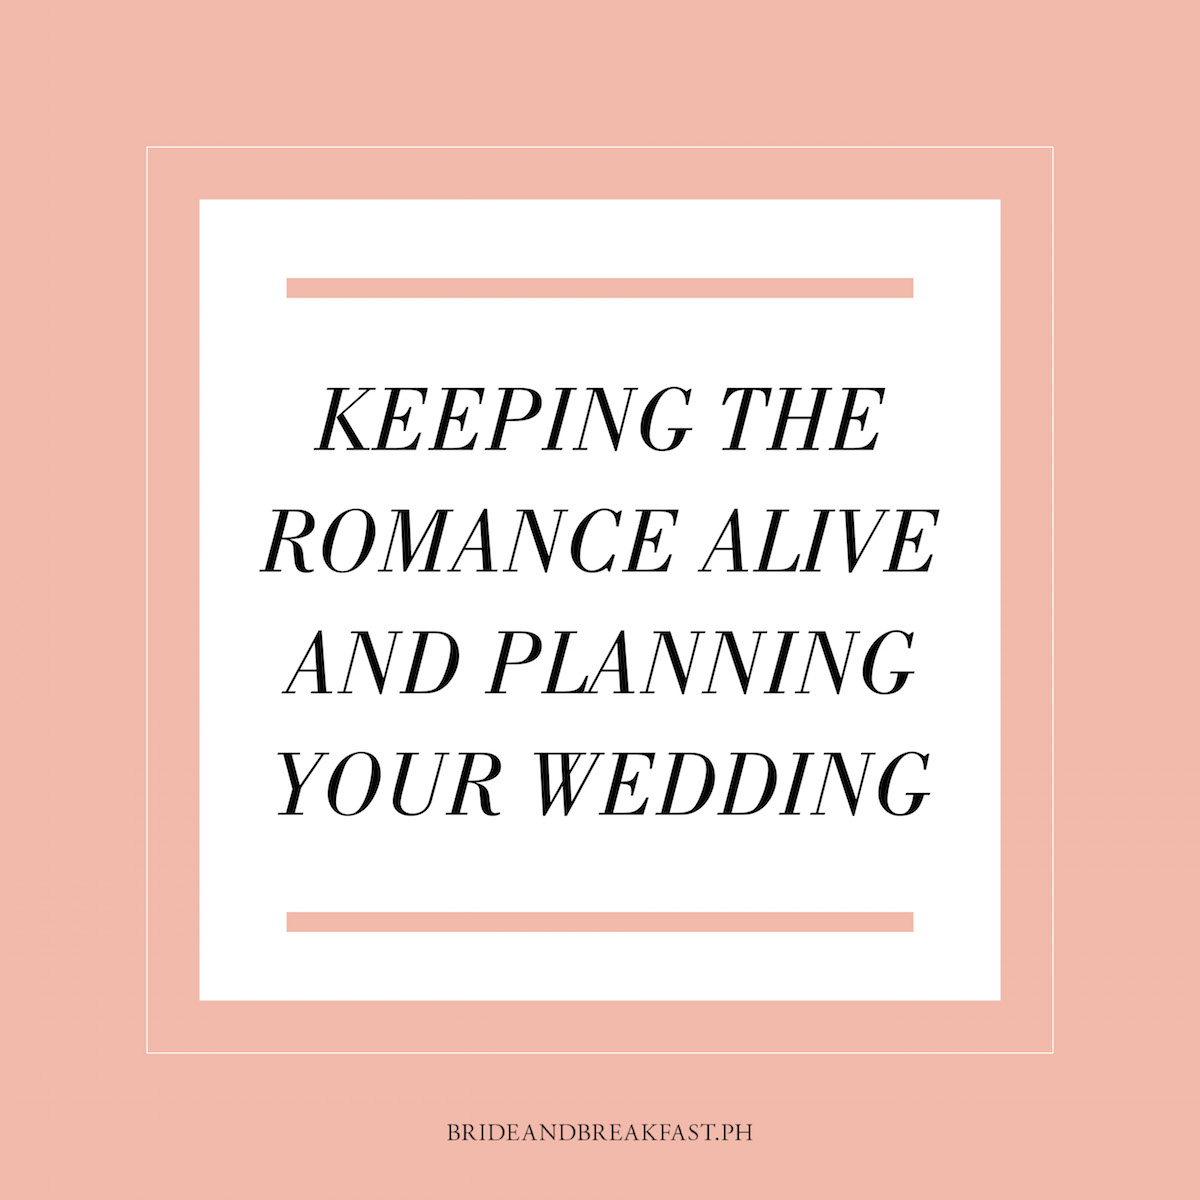 Keeping the Romance Alive and Planning Your Wedding